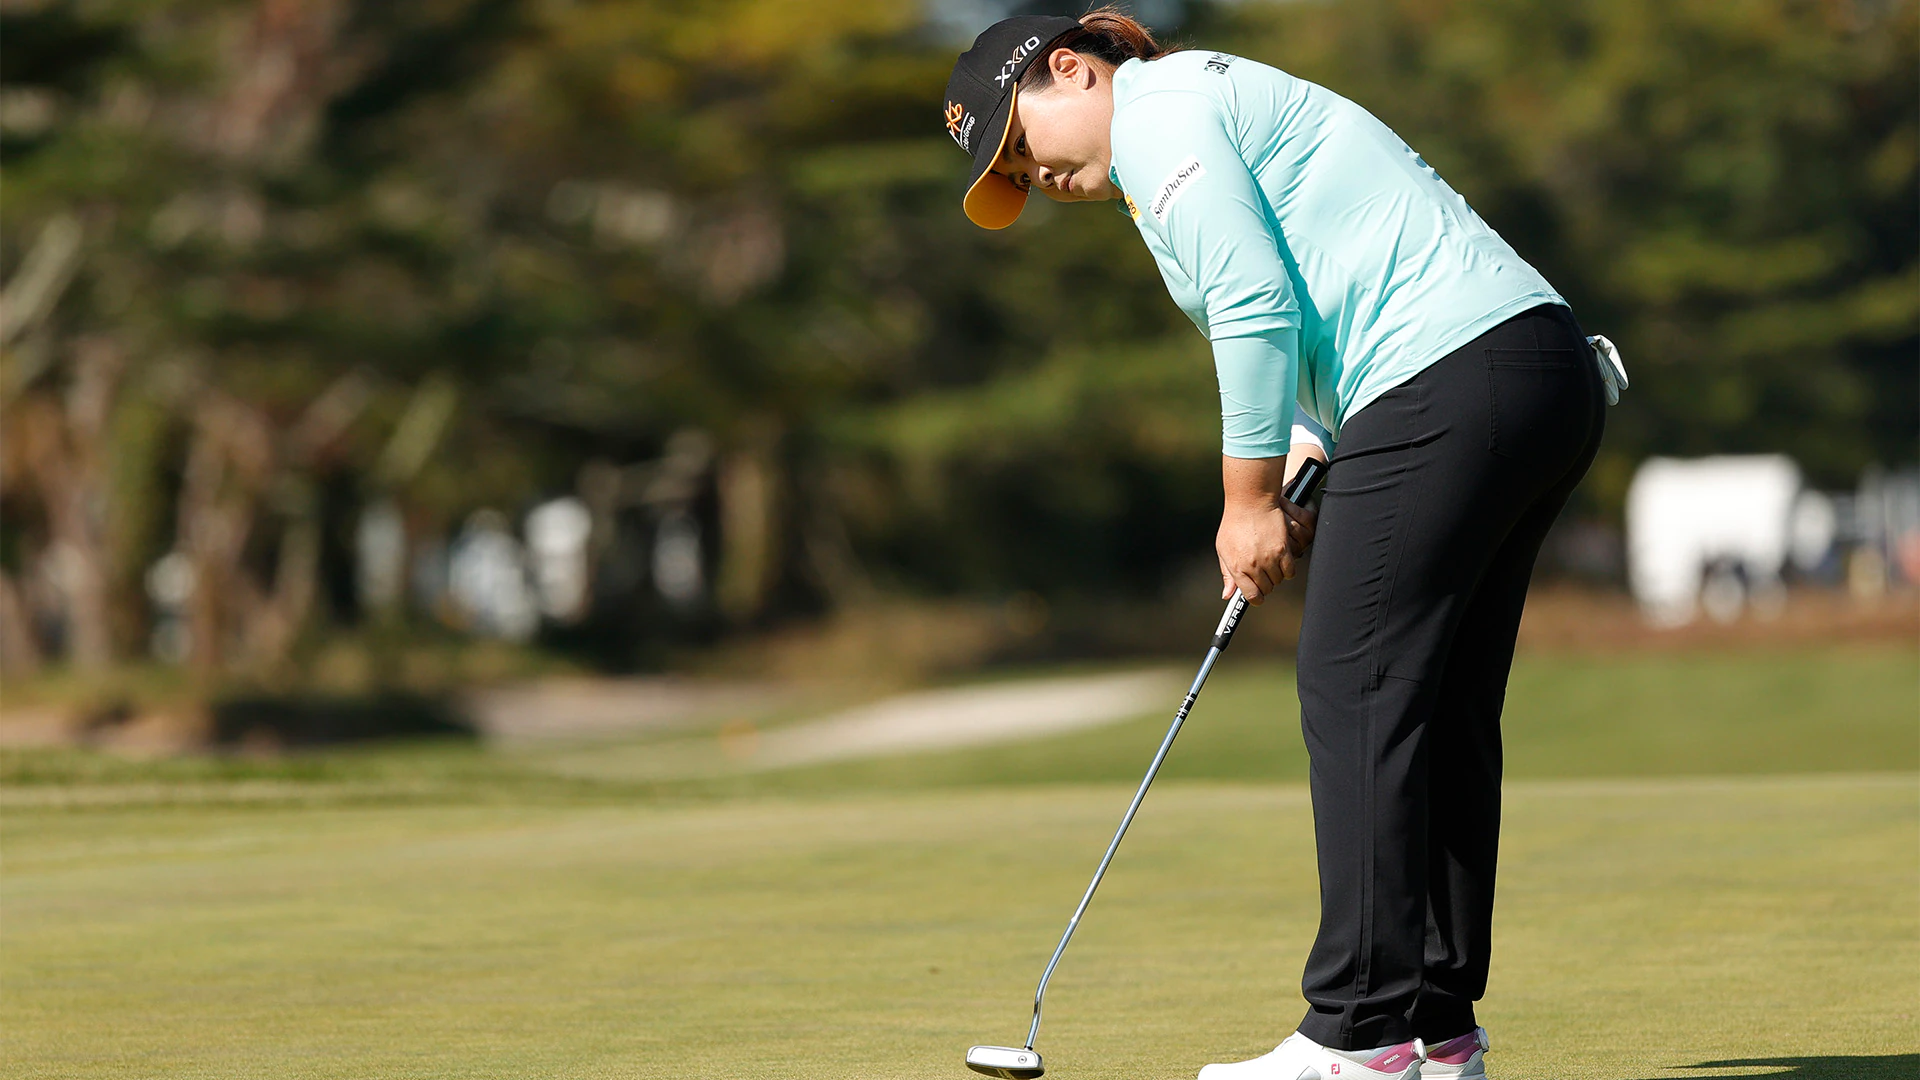 Inbee Park explains why she’s the world’s best putter from 10-15 feet